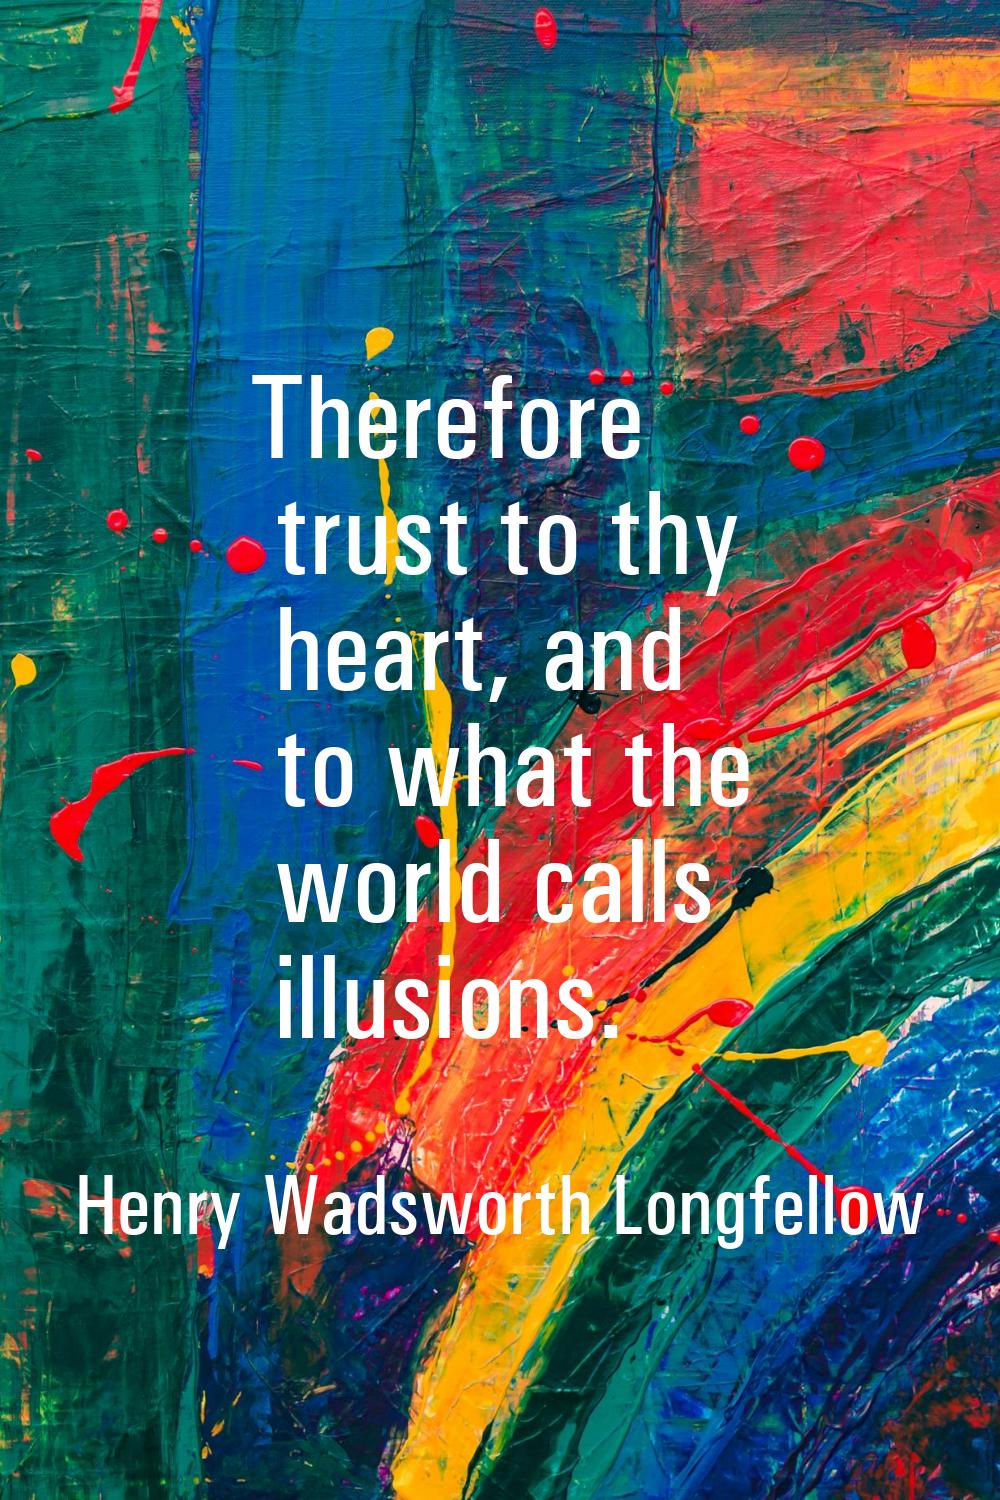 Therefore trust to thy heart, and to what the world calls illusions.